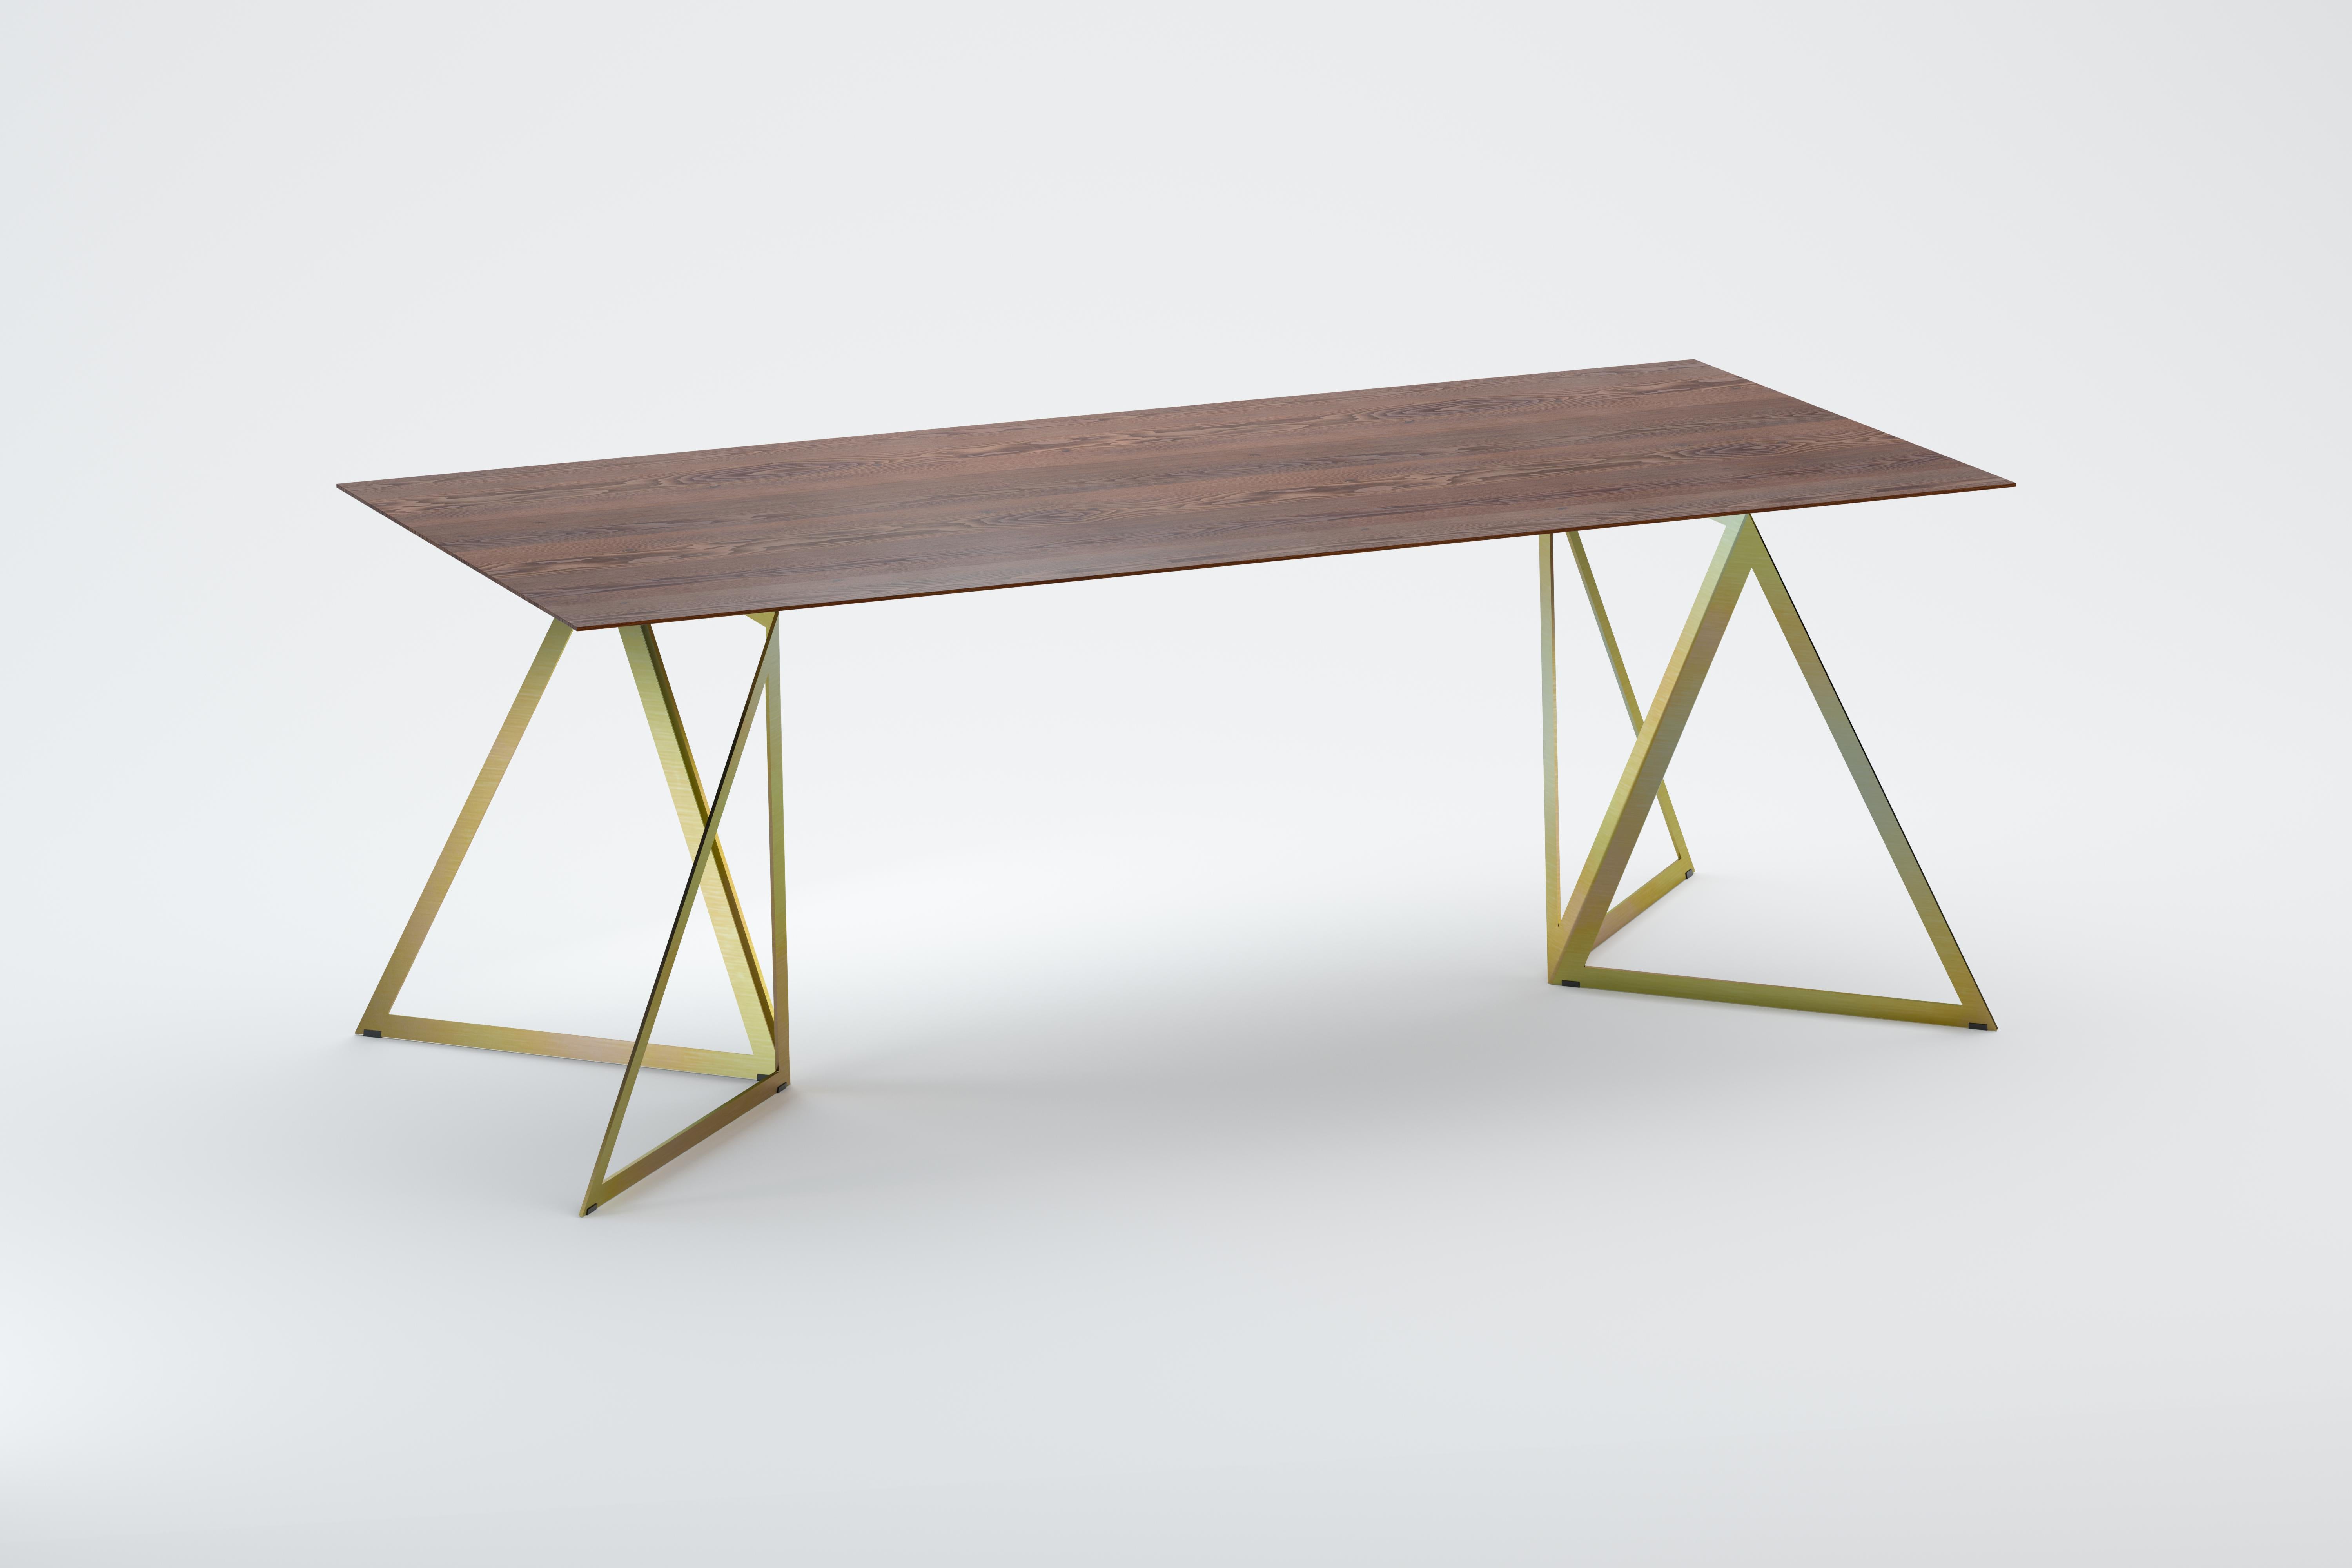 Steel stand table 200 Walnut by Sebastian Scherer.
Dimensions: D200 x W90 x H74 cm.
Materials: Walnut, Steel, Wood.
Also Available: Colours:Solid wood (matt lacquered or oiled): black and white stained ash / natural oak / american walnut
Steel